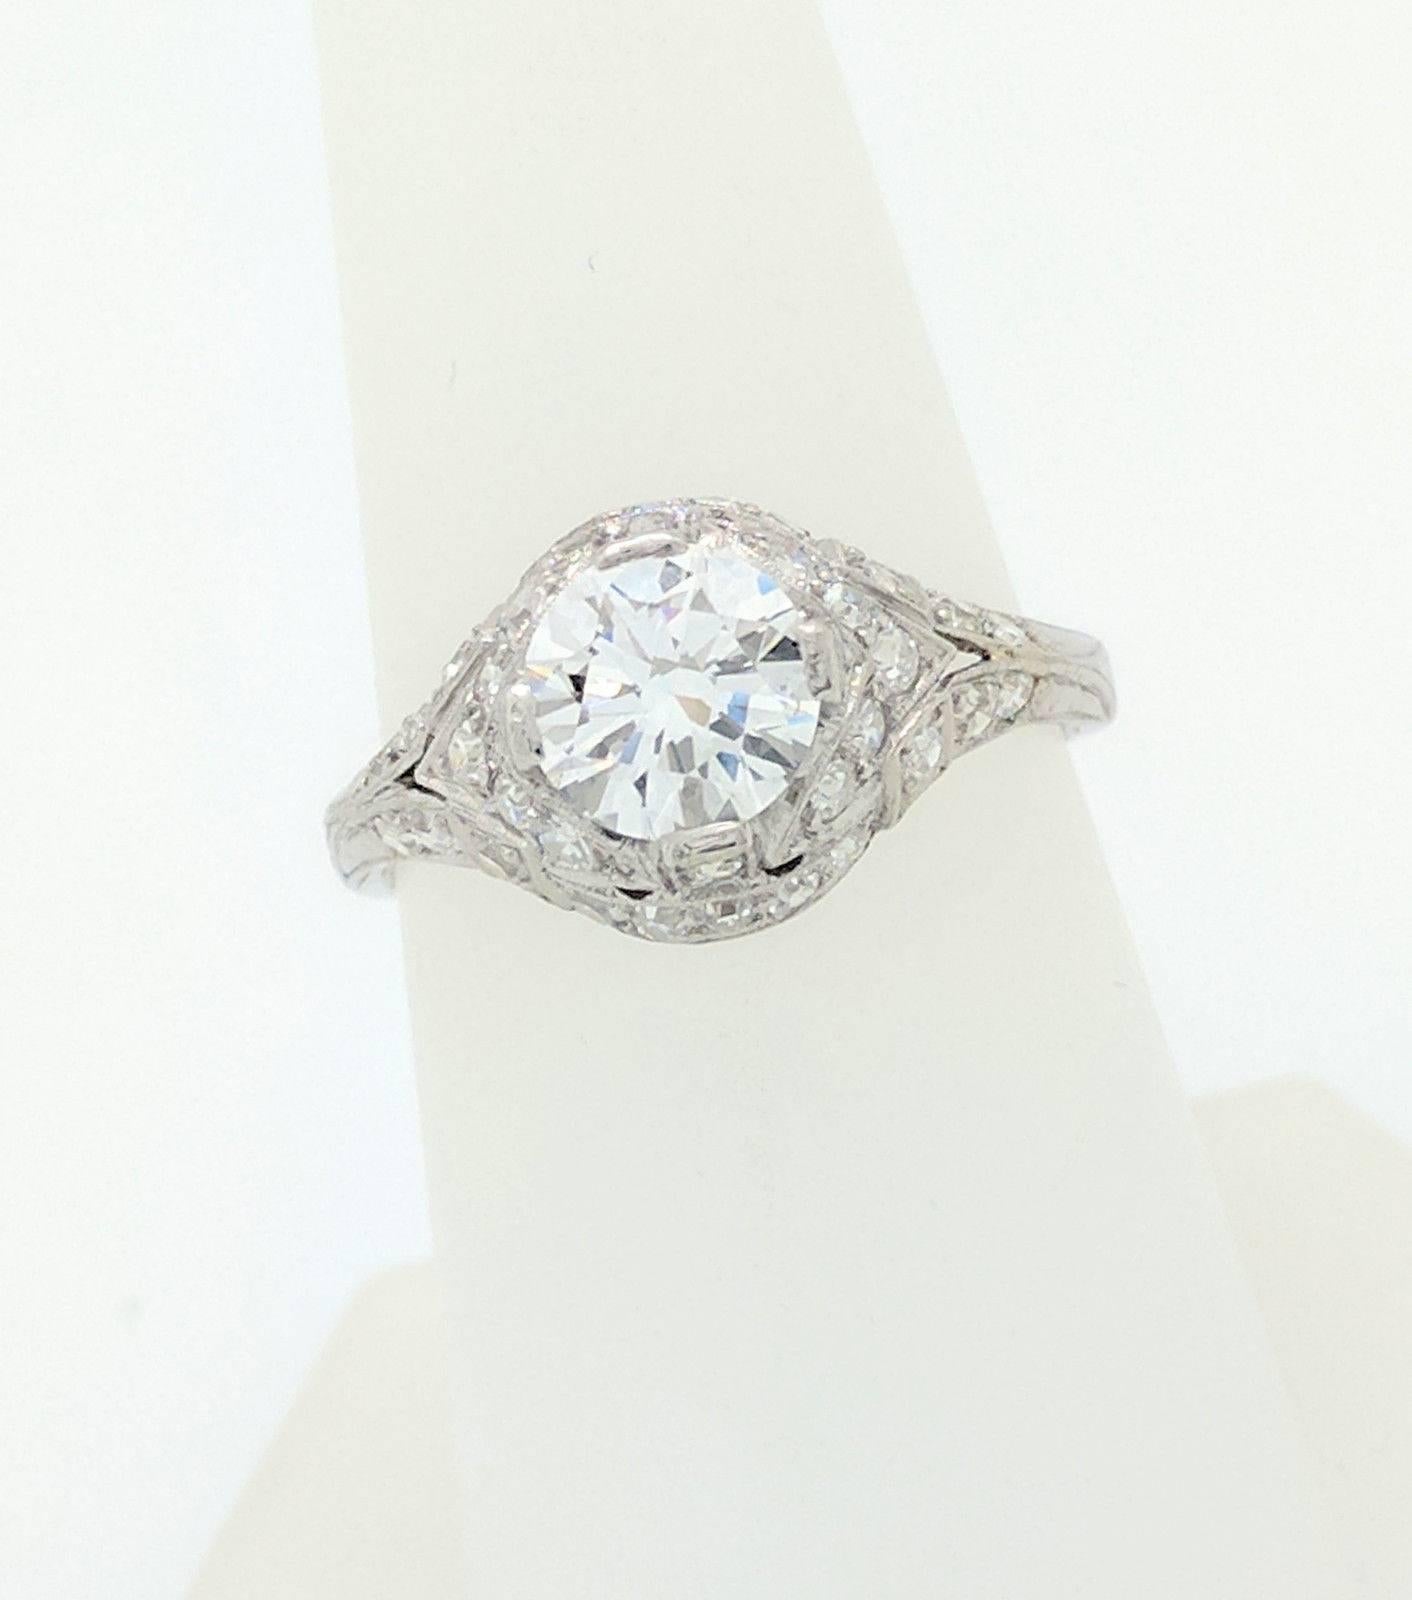 1.18ct Natural Round Brilliant Cut Platinum Diamond Estate Engagement Ring SI2/H

You are viewing a Stunning 1.18ct. Natural Round Brilliant Cut Diamond set in a vintage engagement ring setting. This vintage setting is crafted from platinum and